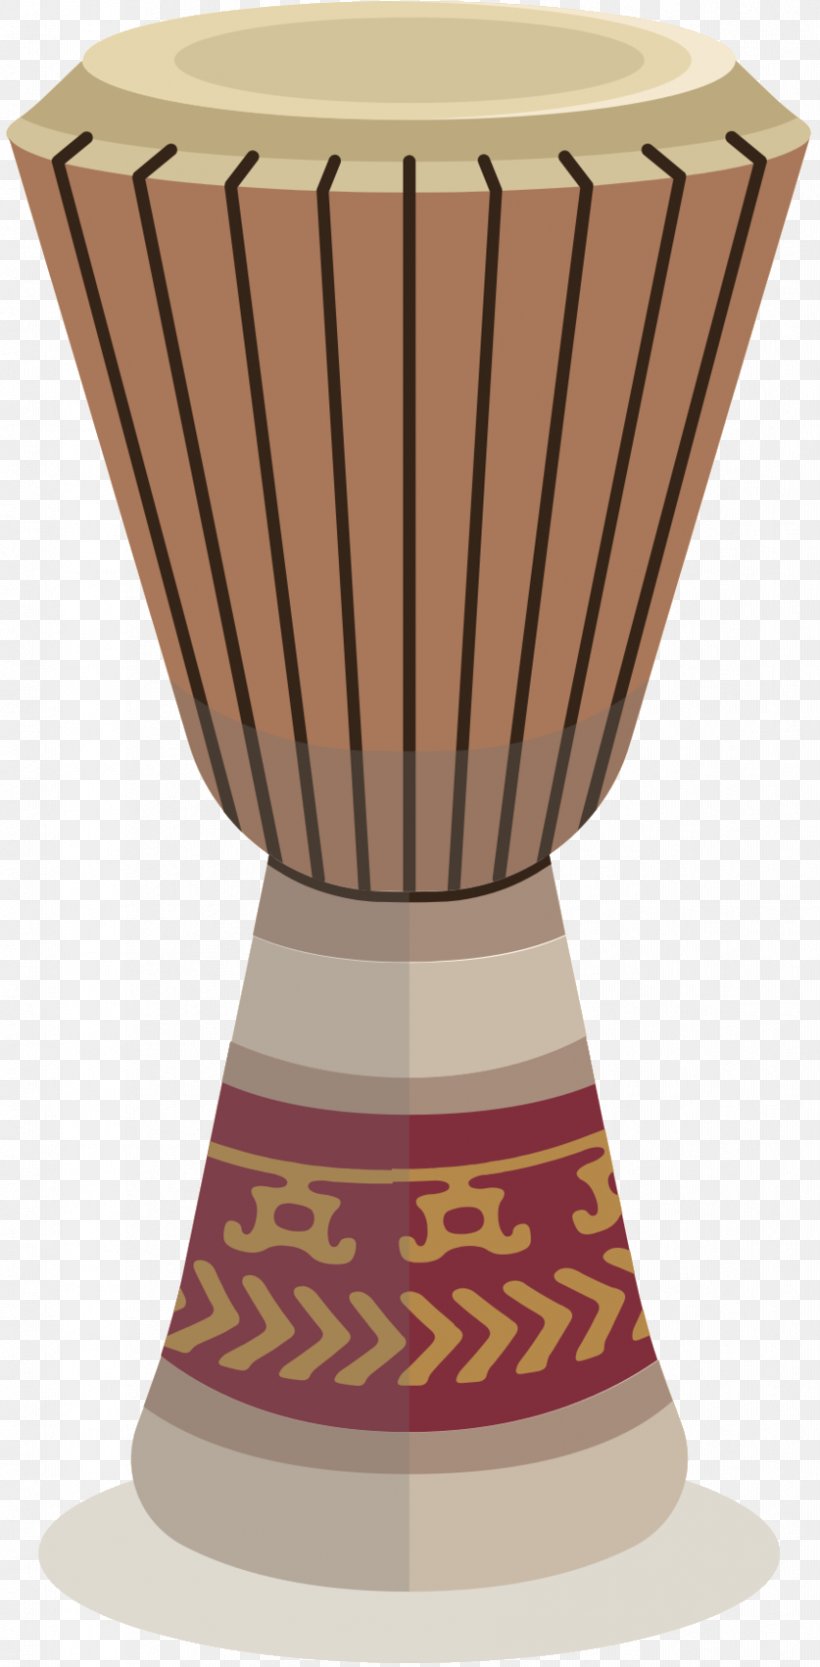 Djembe Drum Tom-Toms Image, PNG, 837x1702px, Djembe, Cartoon, Copyright, Drum, Embroidery Download Free